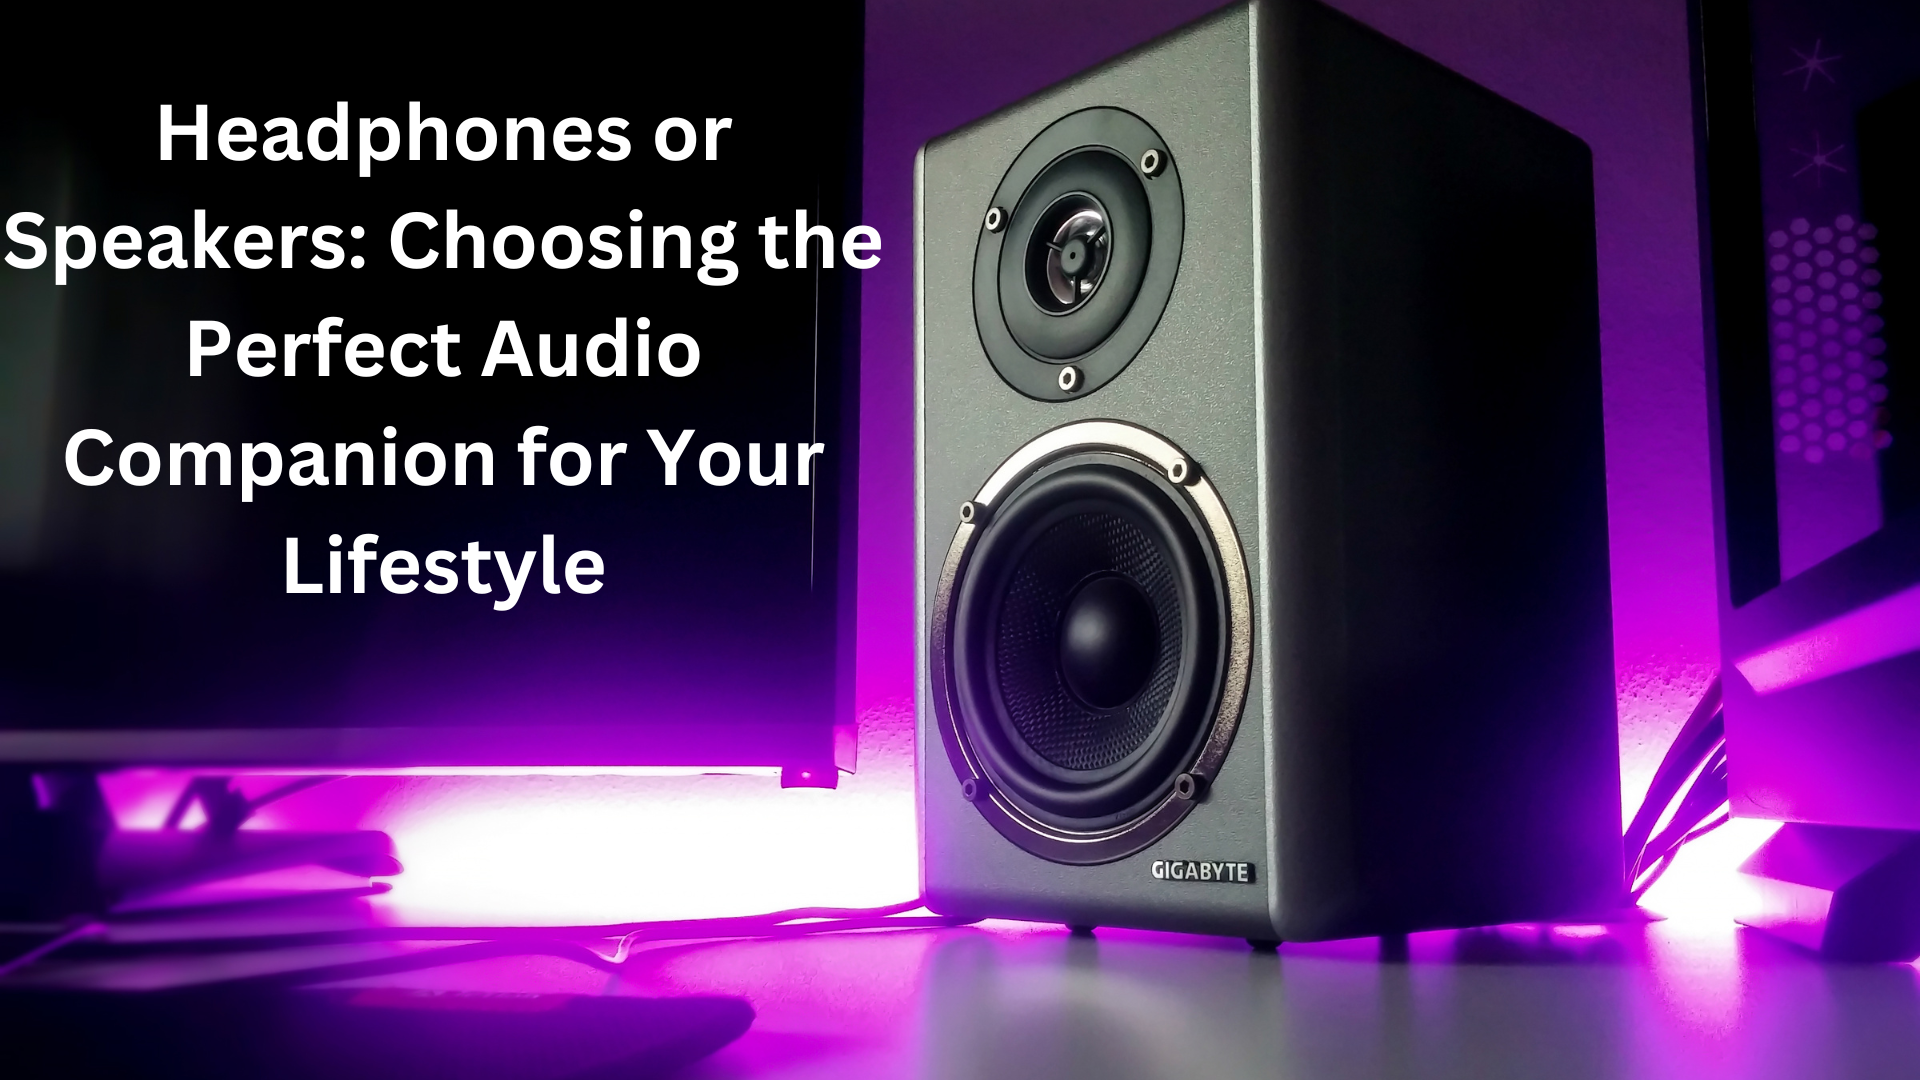 Headphones or Speakers Choosing the Perfect Audio Companion for Your Lifestyle